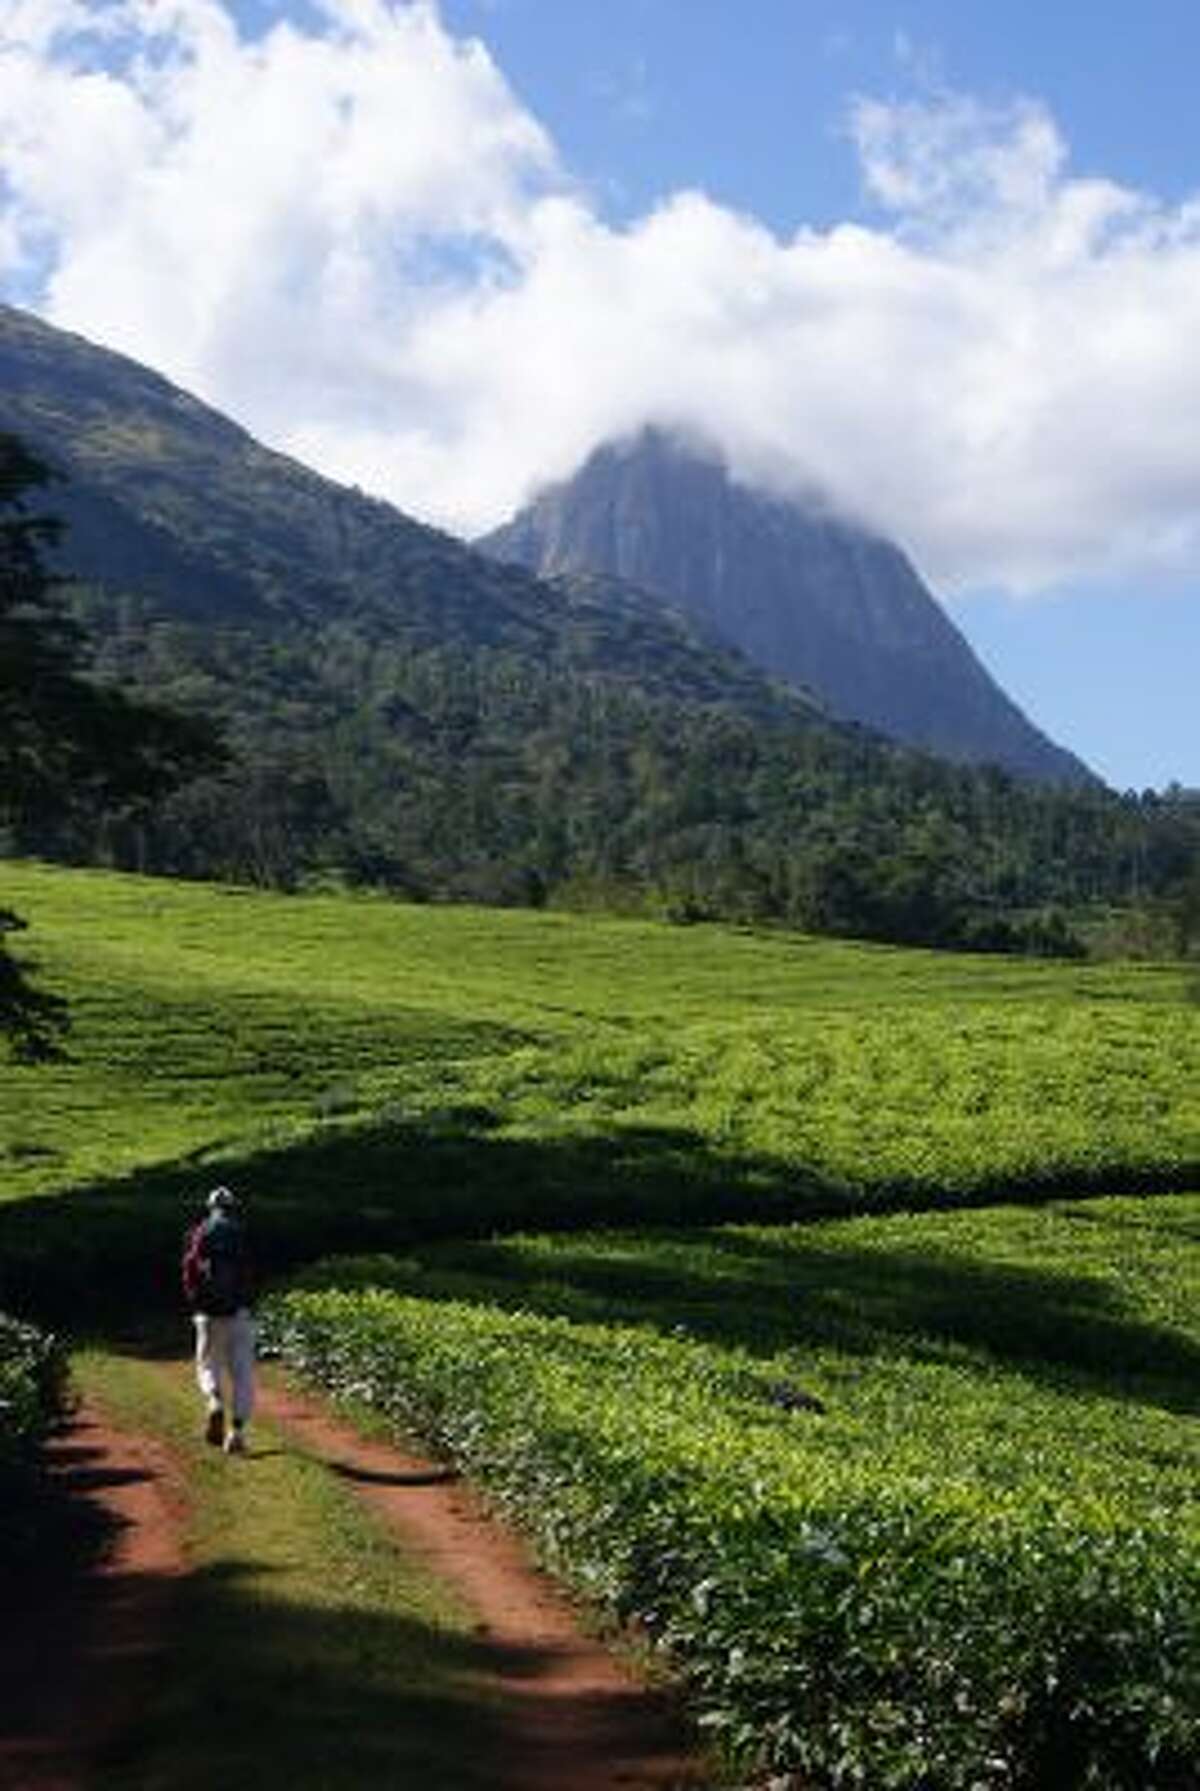 A trail passes through one of the many tea plantations that surround the base of Mount Mulanje in Malawi; Malanje is said to have inspired J.R.R. Tolkien's Hobbitt books.